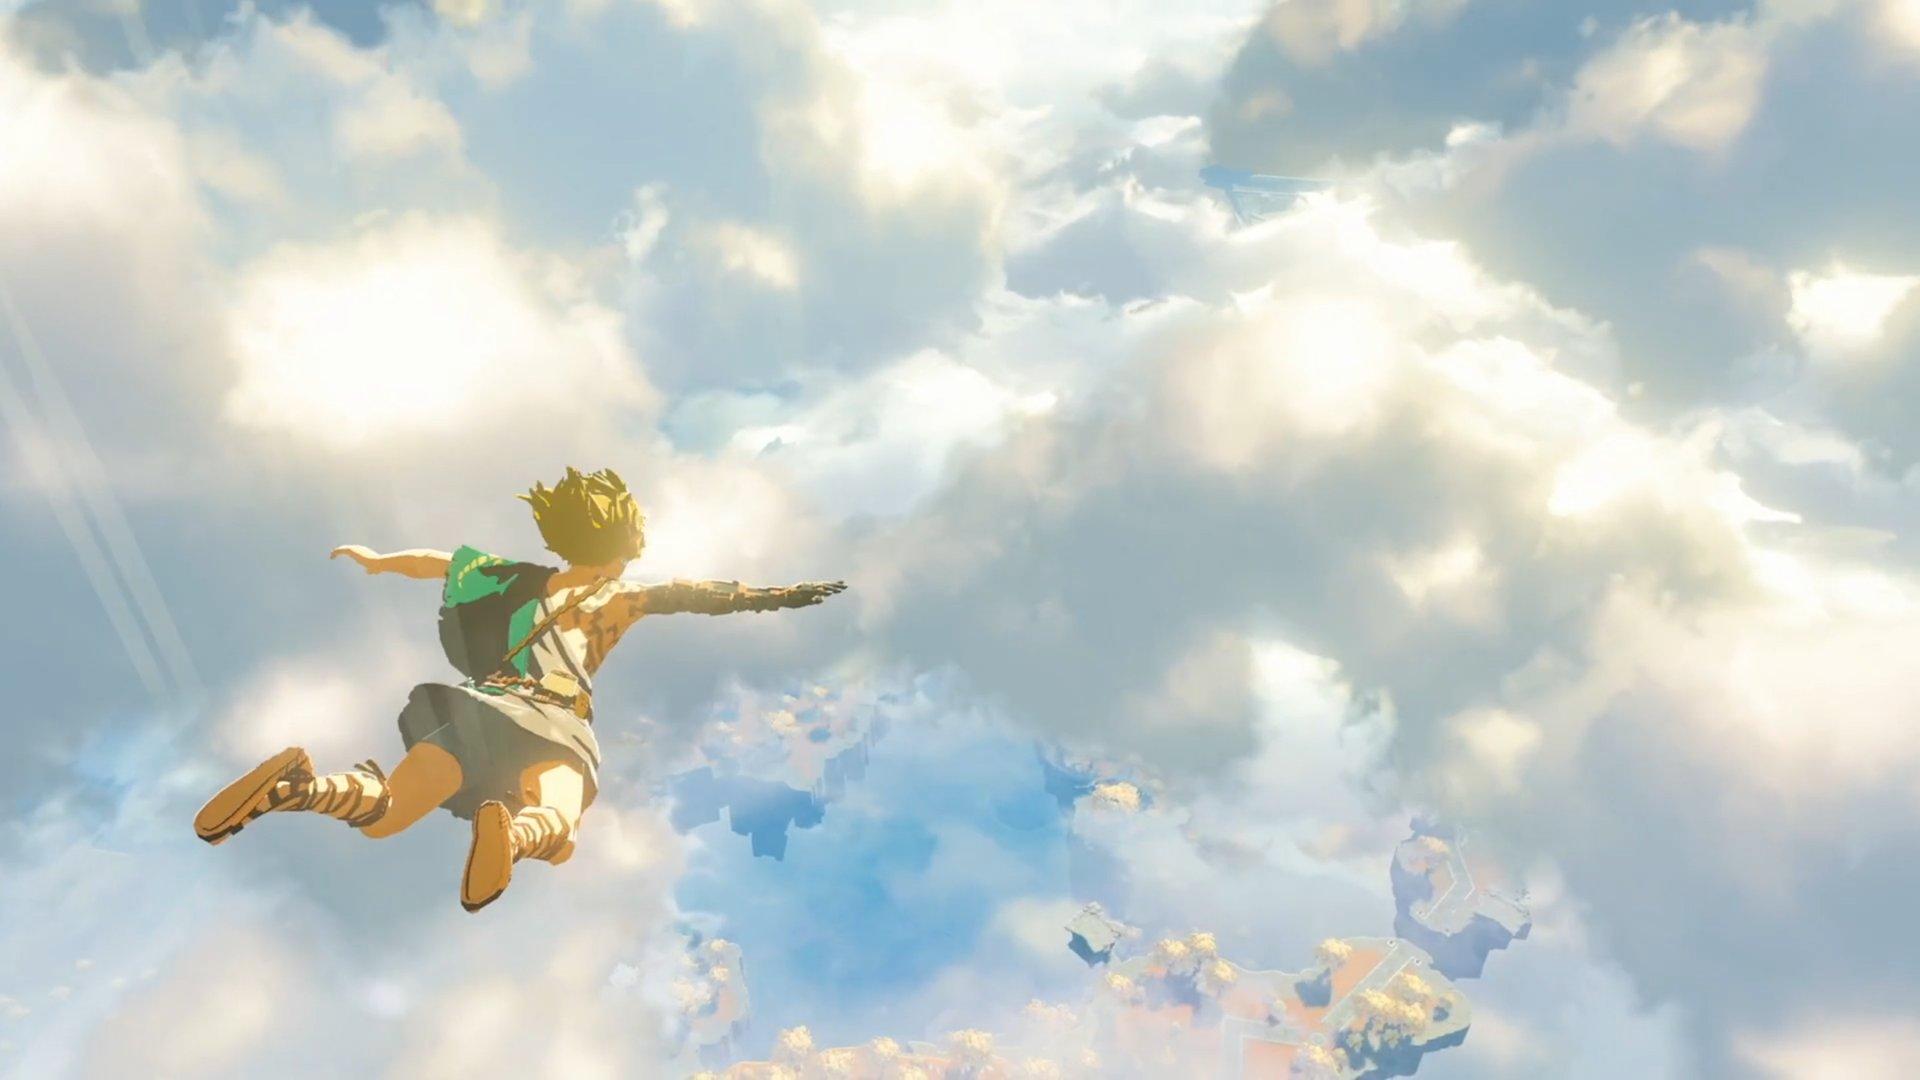 Breath of the Wild 2 listing hints at a release date – here's why it could  be true